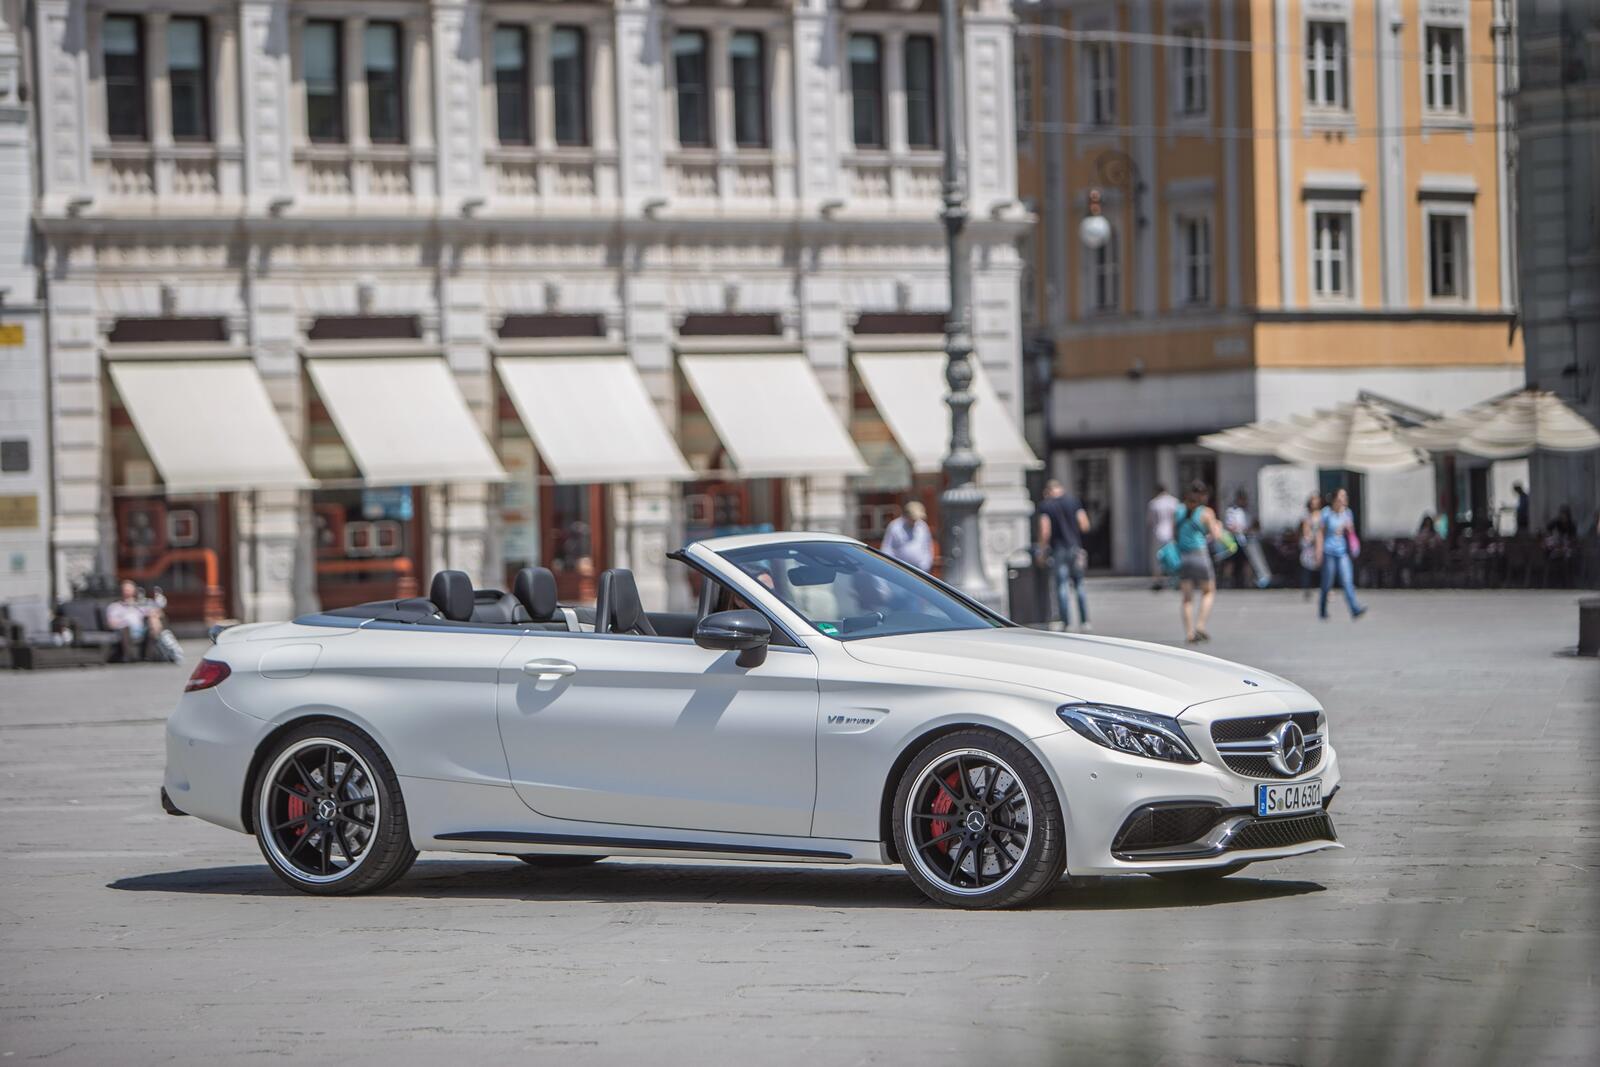 Wallpapers side view wallpaper mercedes amg c63 s cabriolet white car on the desktop